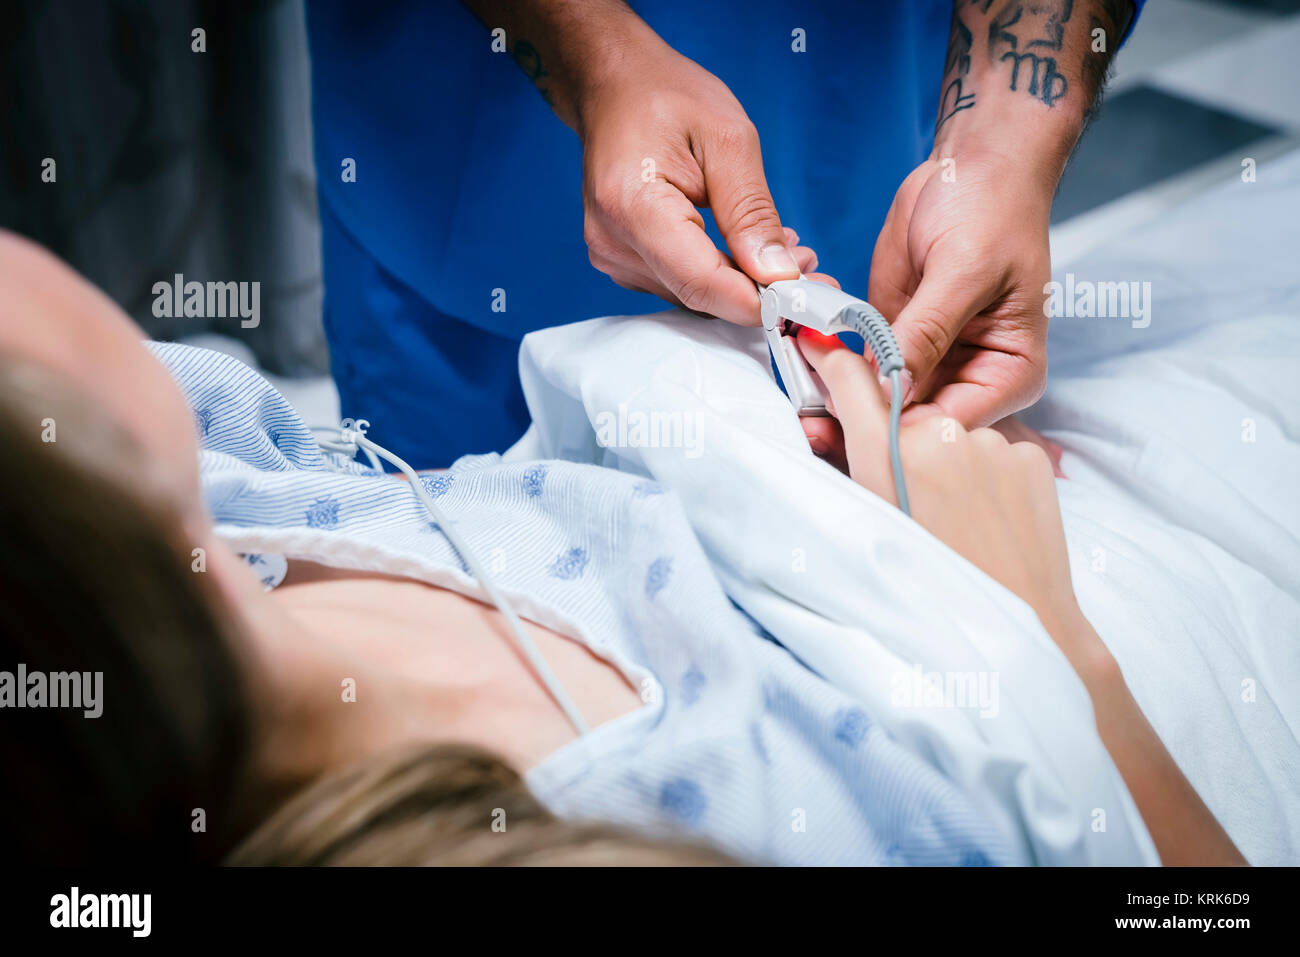 Nurse placing finger monitor on patient Stock Photo